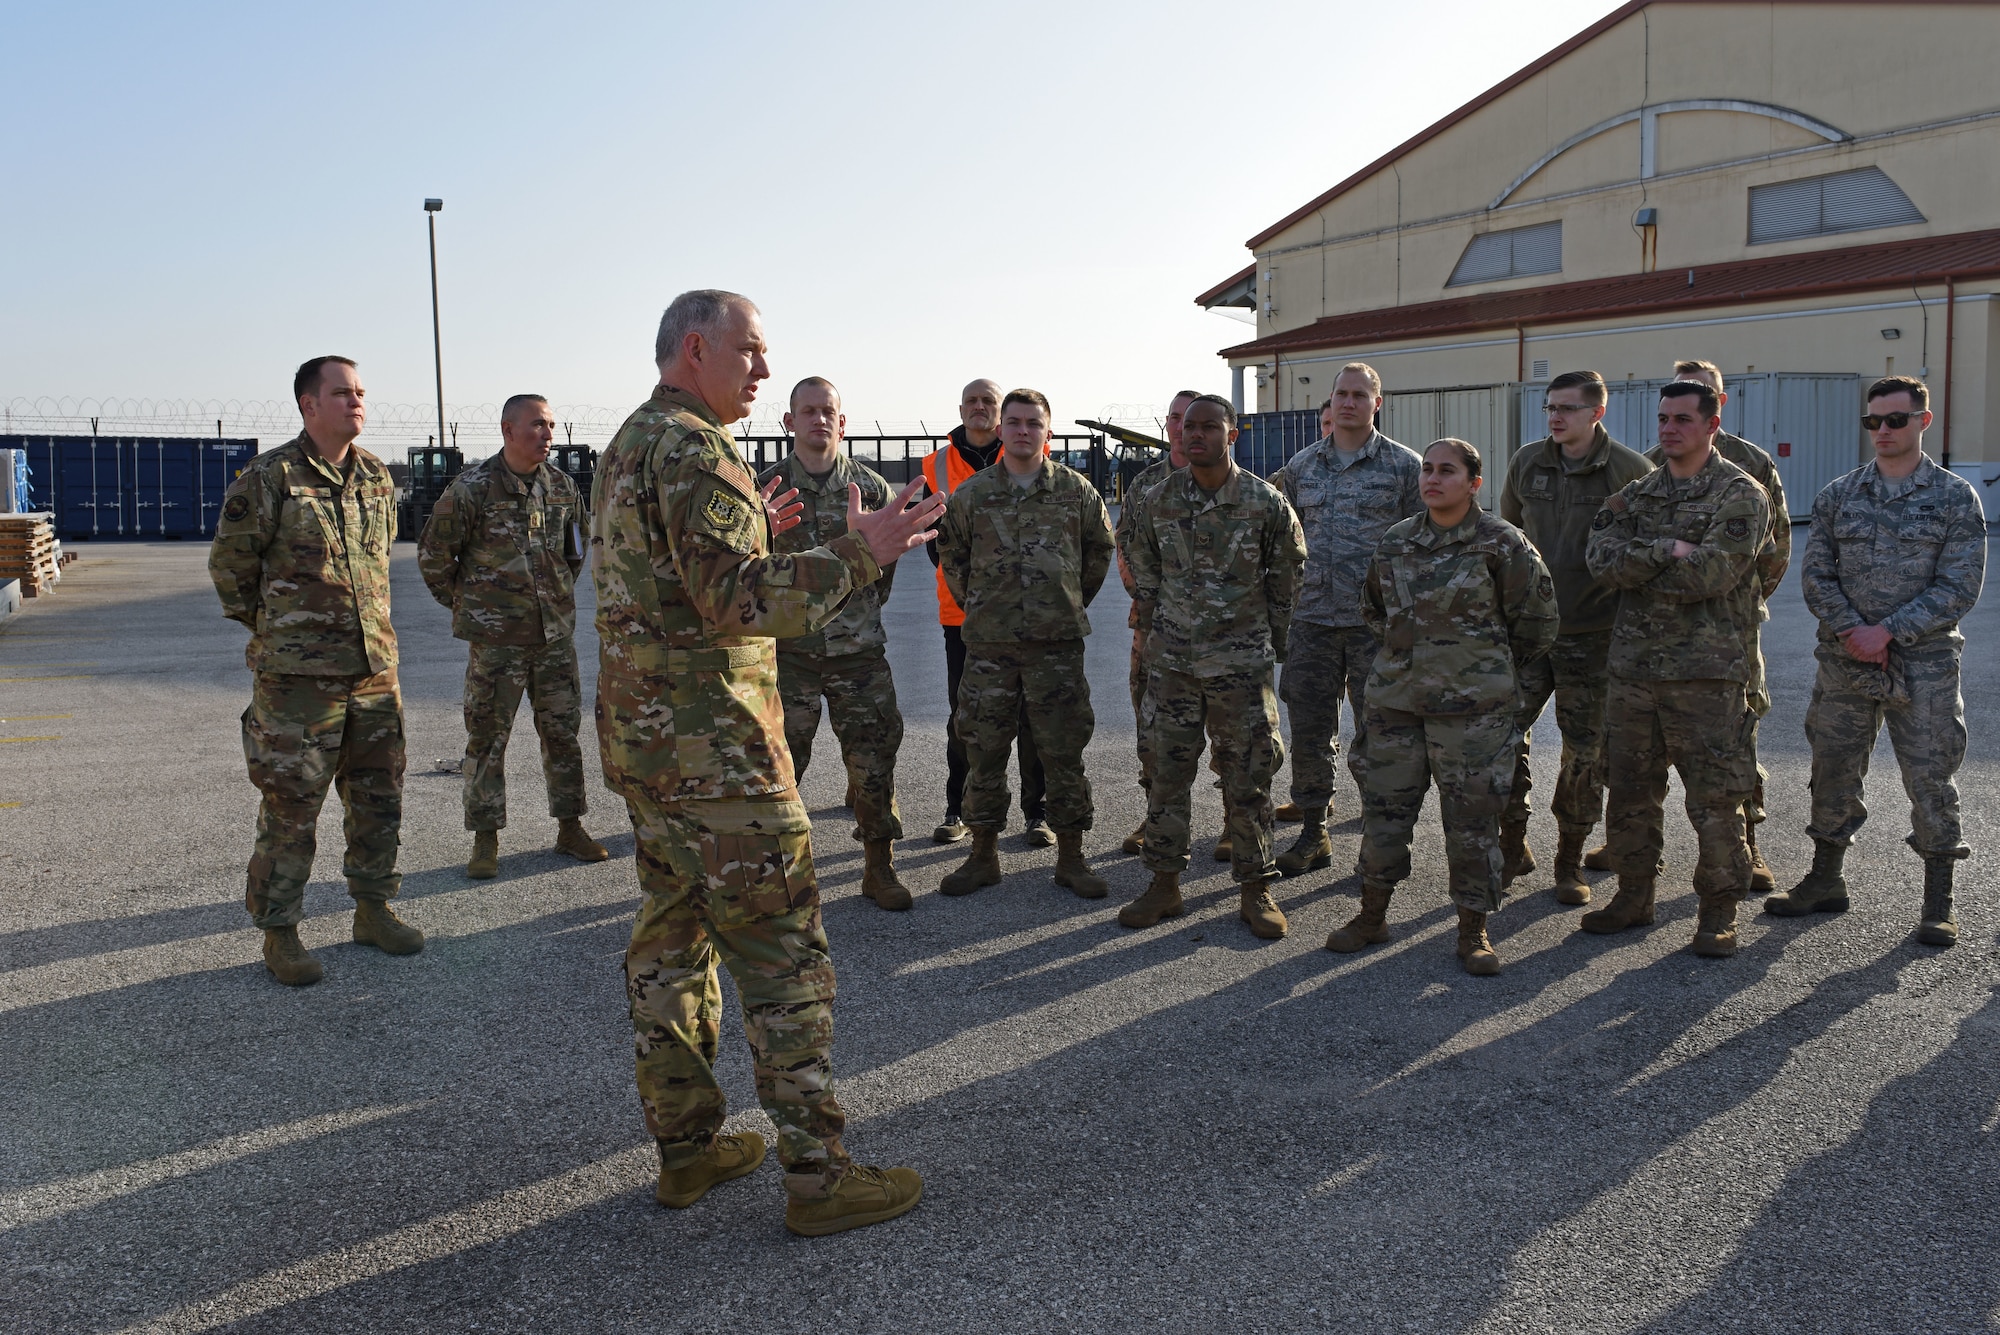 U.S. Air Force Maj. Gen. John Gordy, U.S. Air Force Expeditionary Center commander, speaks to Airmen from the 724th Air Mobility Squadron about their contributions to the mission during a site visit at Aviano Air Base, Italy, Jan. 24, 2020. The 724th AMS consists of a combat readiness flight, passenger and aircraft services section, air mobility control center and an air terminal operation center.